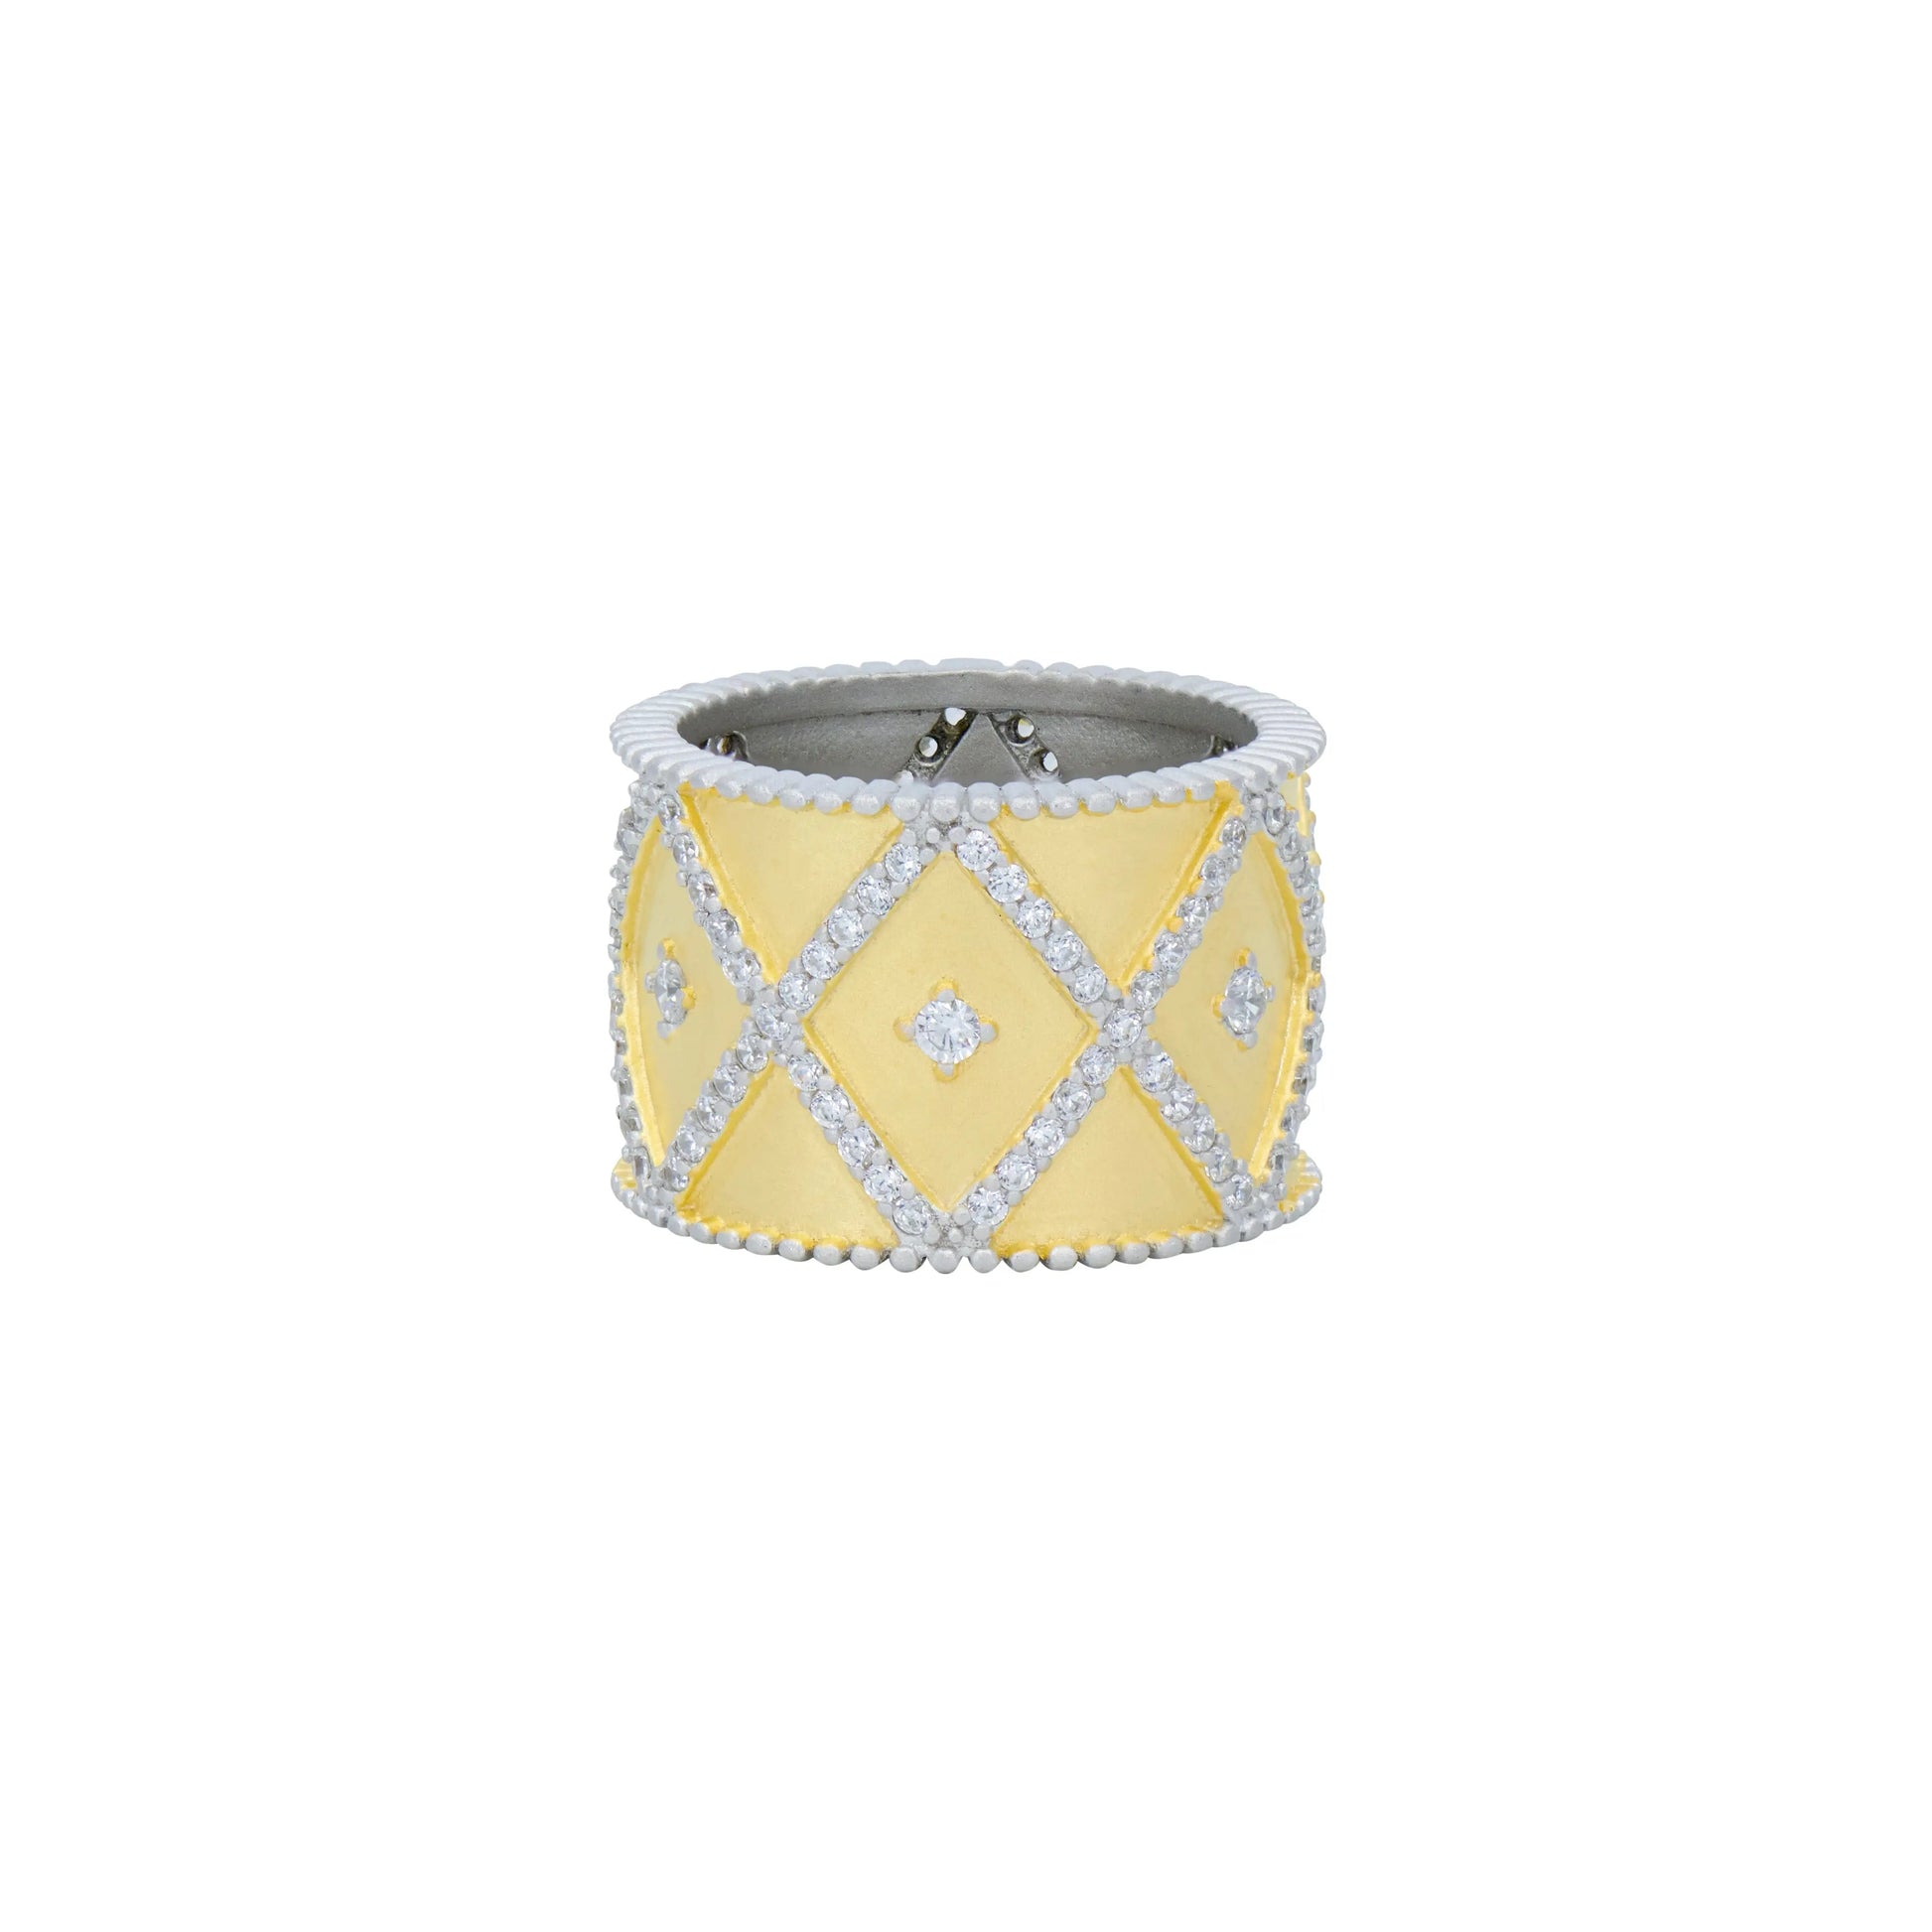 10GoldSilver All-Time Favorite Cigar Band Ring Signature RING